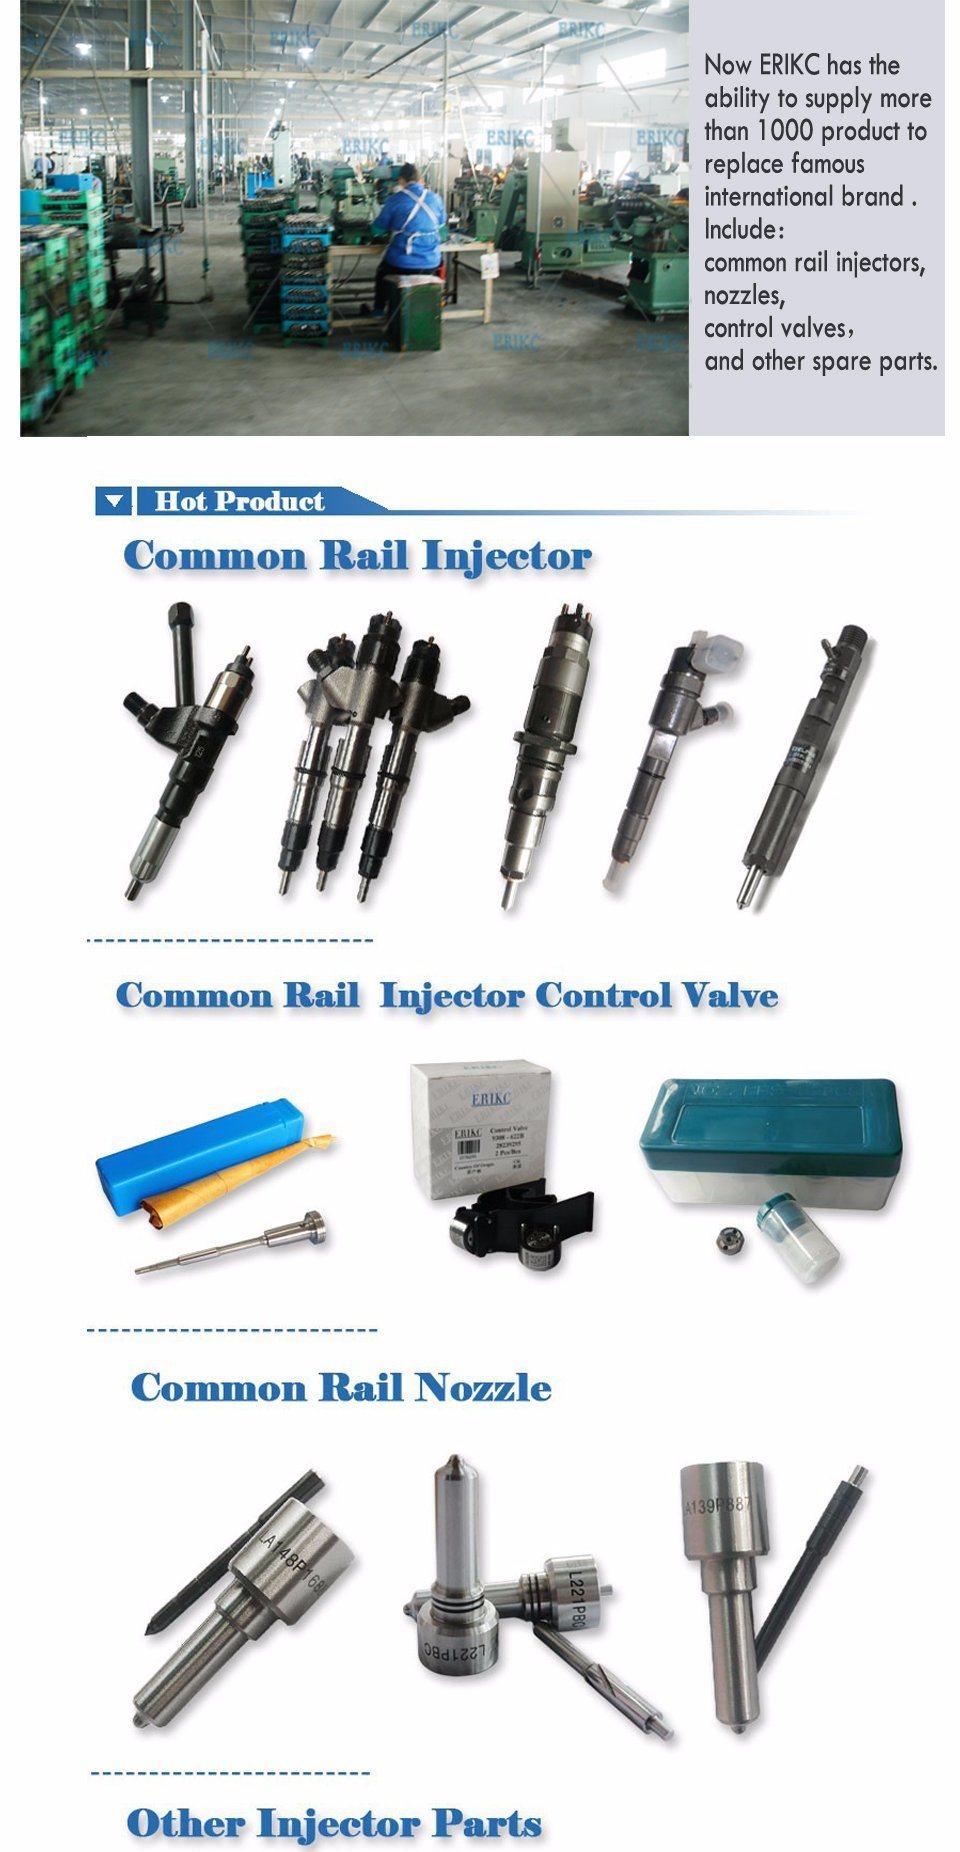 Erikc G3S32 G3S47 G3S51 G3S52 G3S77 Denso Diesel Fuel Pump Engine Injector Nozzle and Fuel Spray Common Rail Injector Nozzle